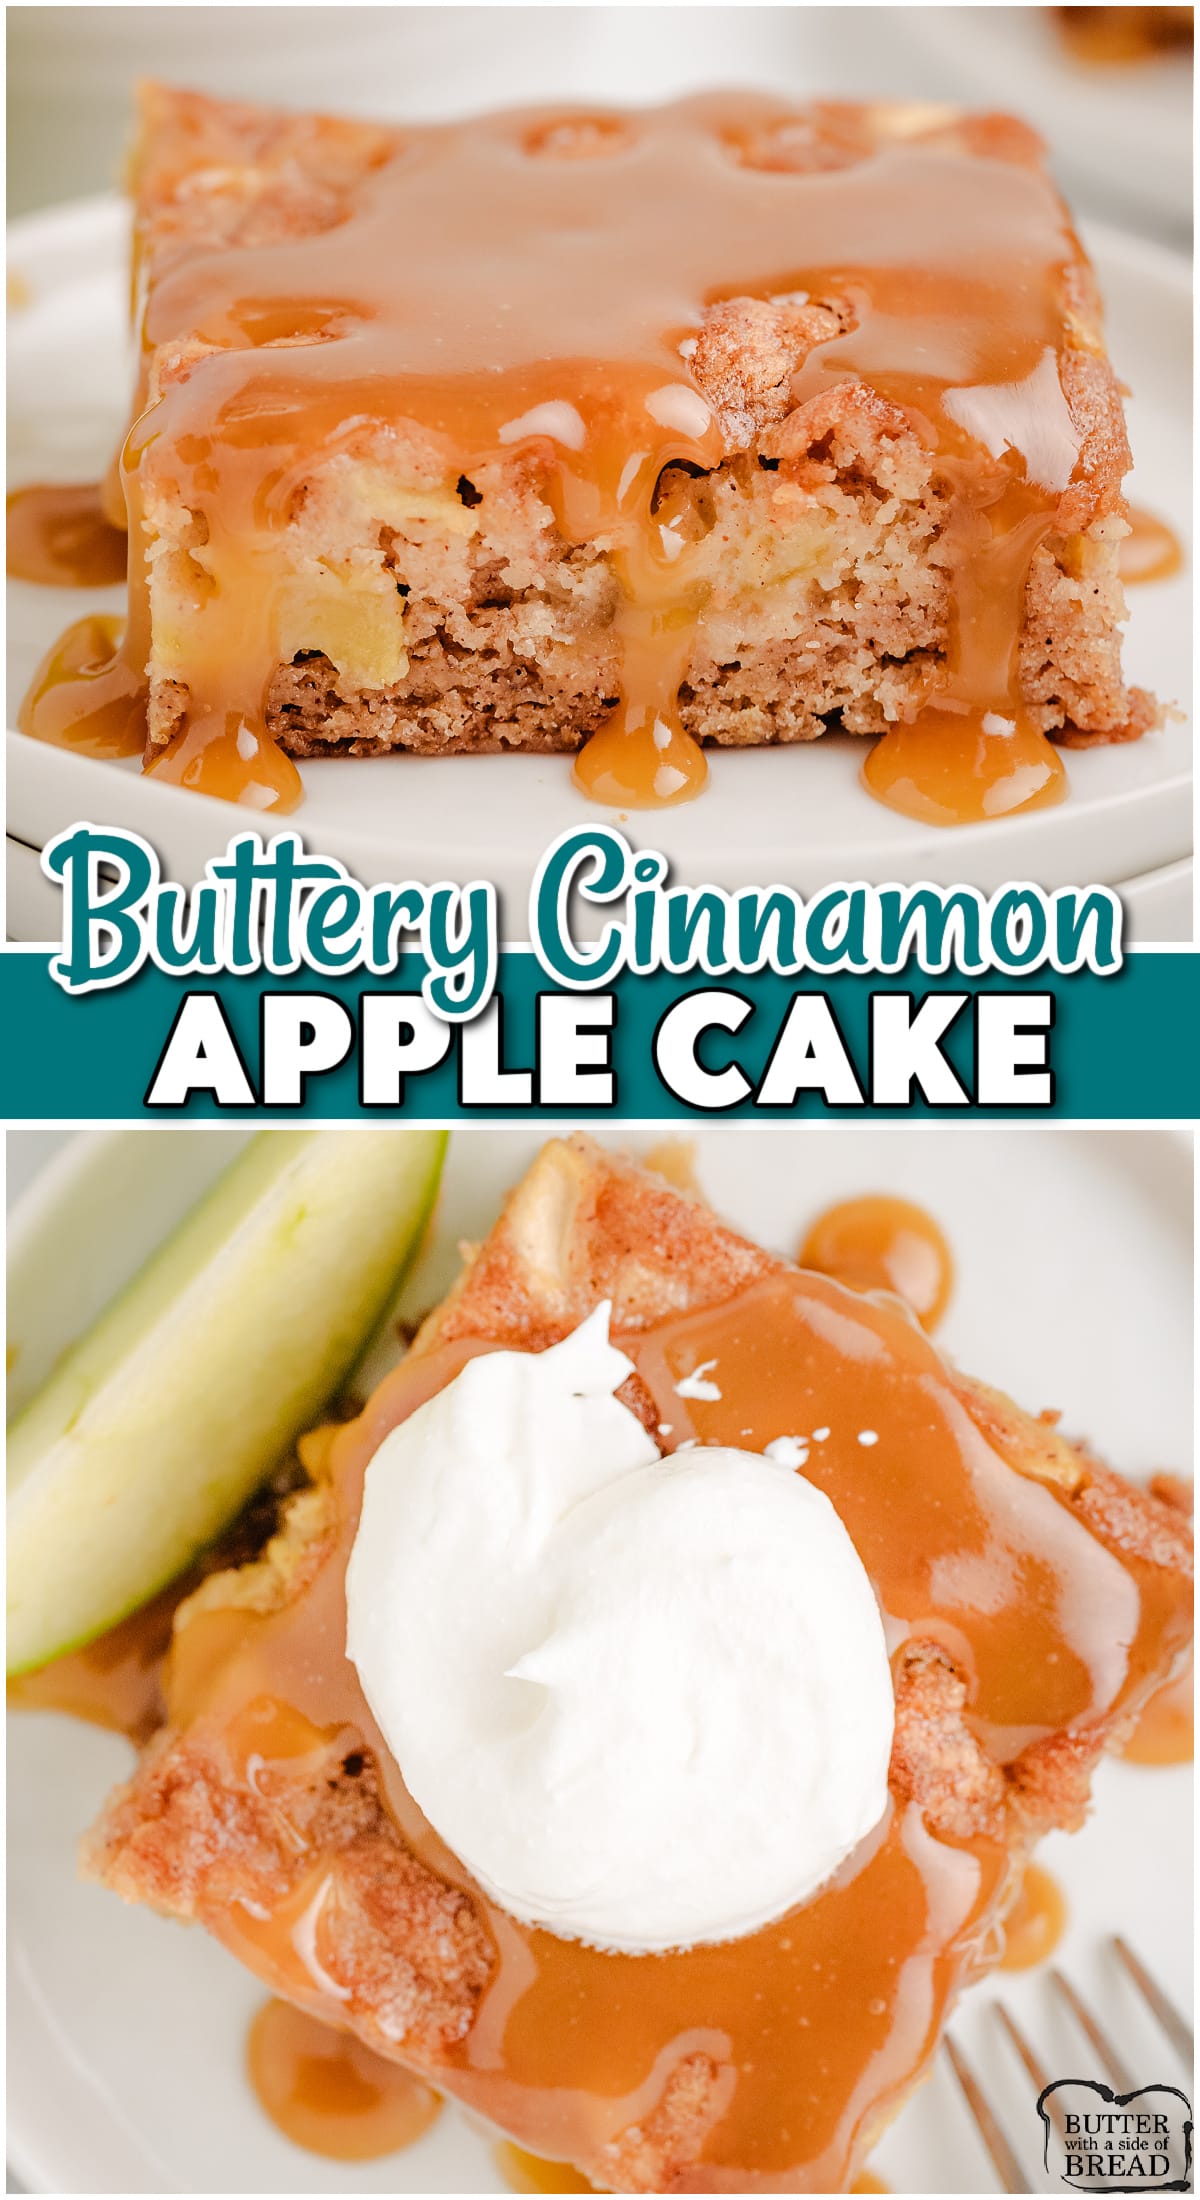 Buttery Apple Cake made with fresh apples & warm spices in a rich, buttery batter, then baked & topped with a simple caramel sauce! Perfect apple cake for Fall!